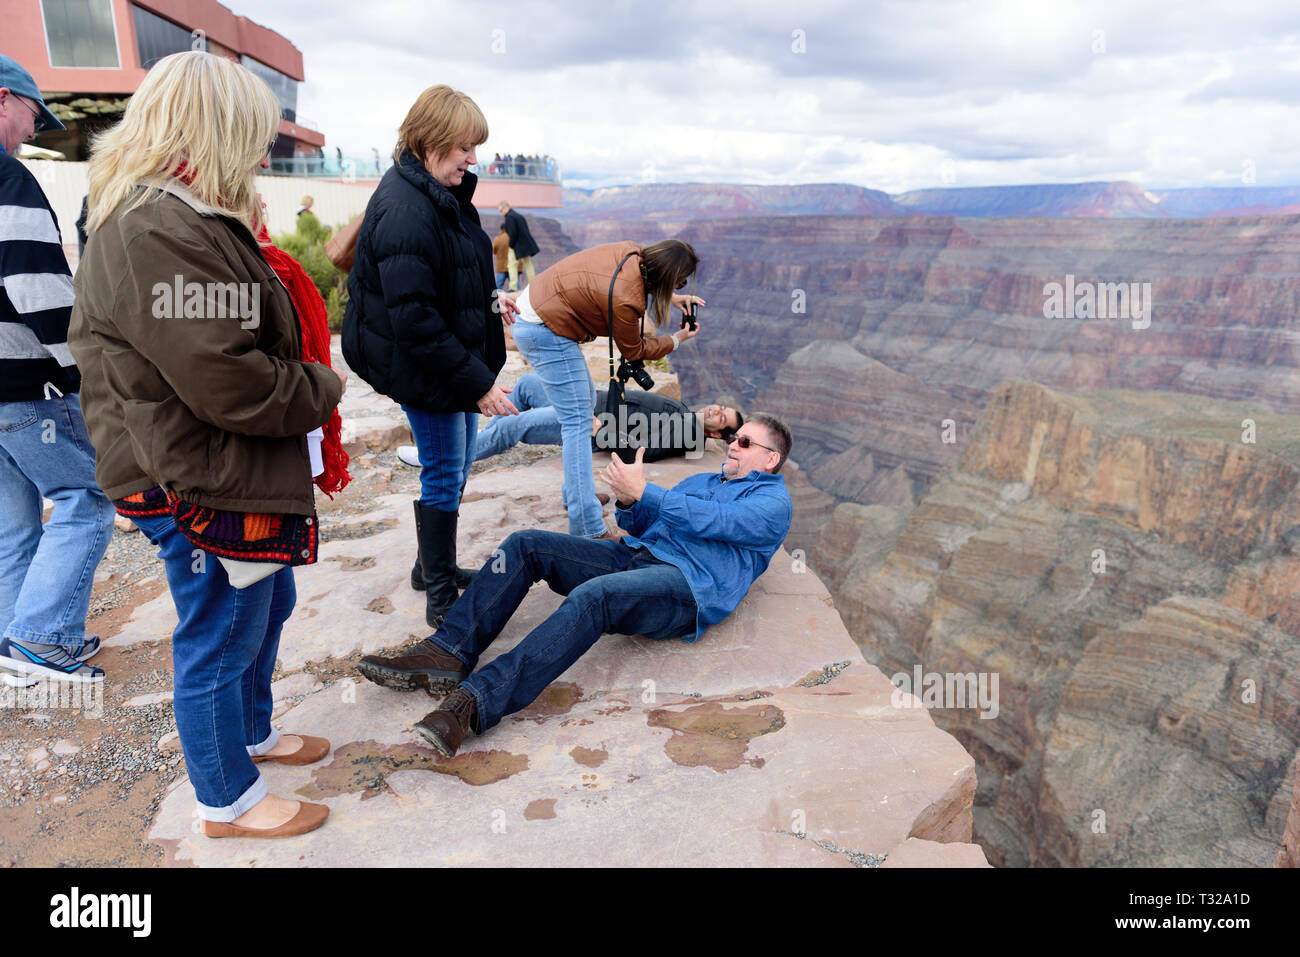 GRAND CANYON - February 19: Tourists take pictures at Eagle Point at Grand Canyon West Rim on February 19, 2017 in Grand Canyon, AZ Stock Photo